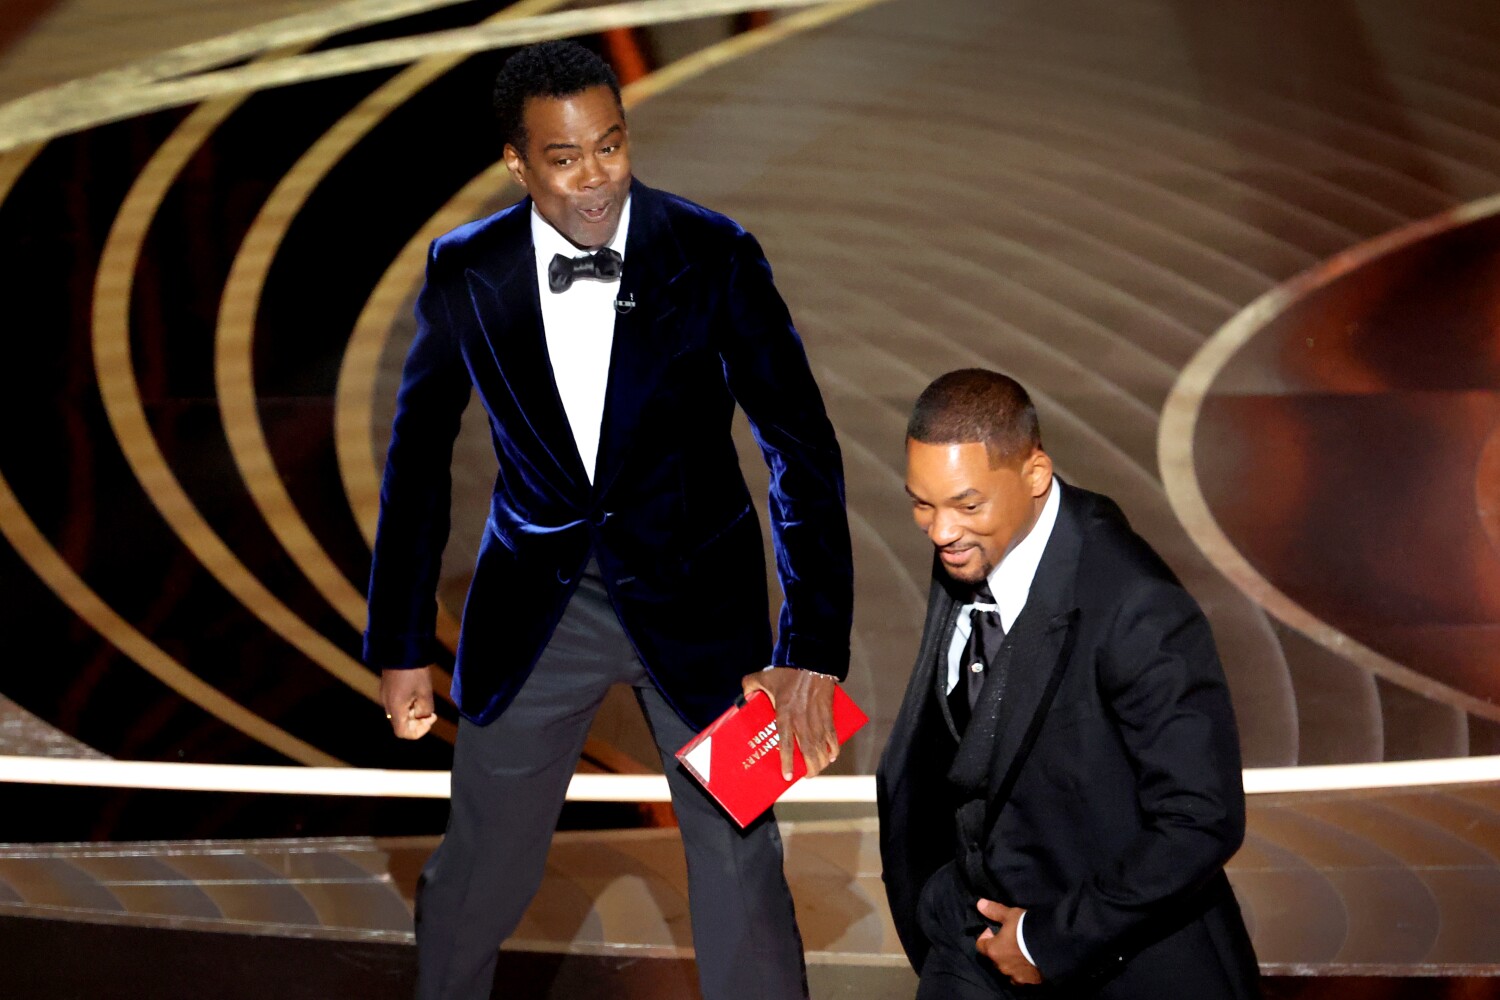 Oscars producer tells 'Good Morning America' LAPD was prepared to arrest Will Smith